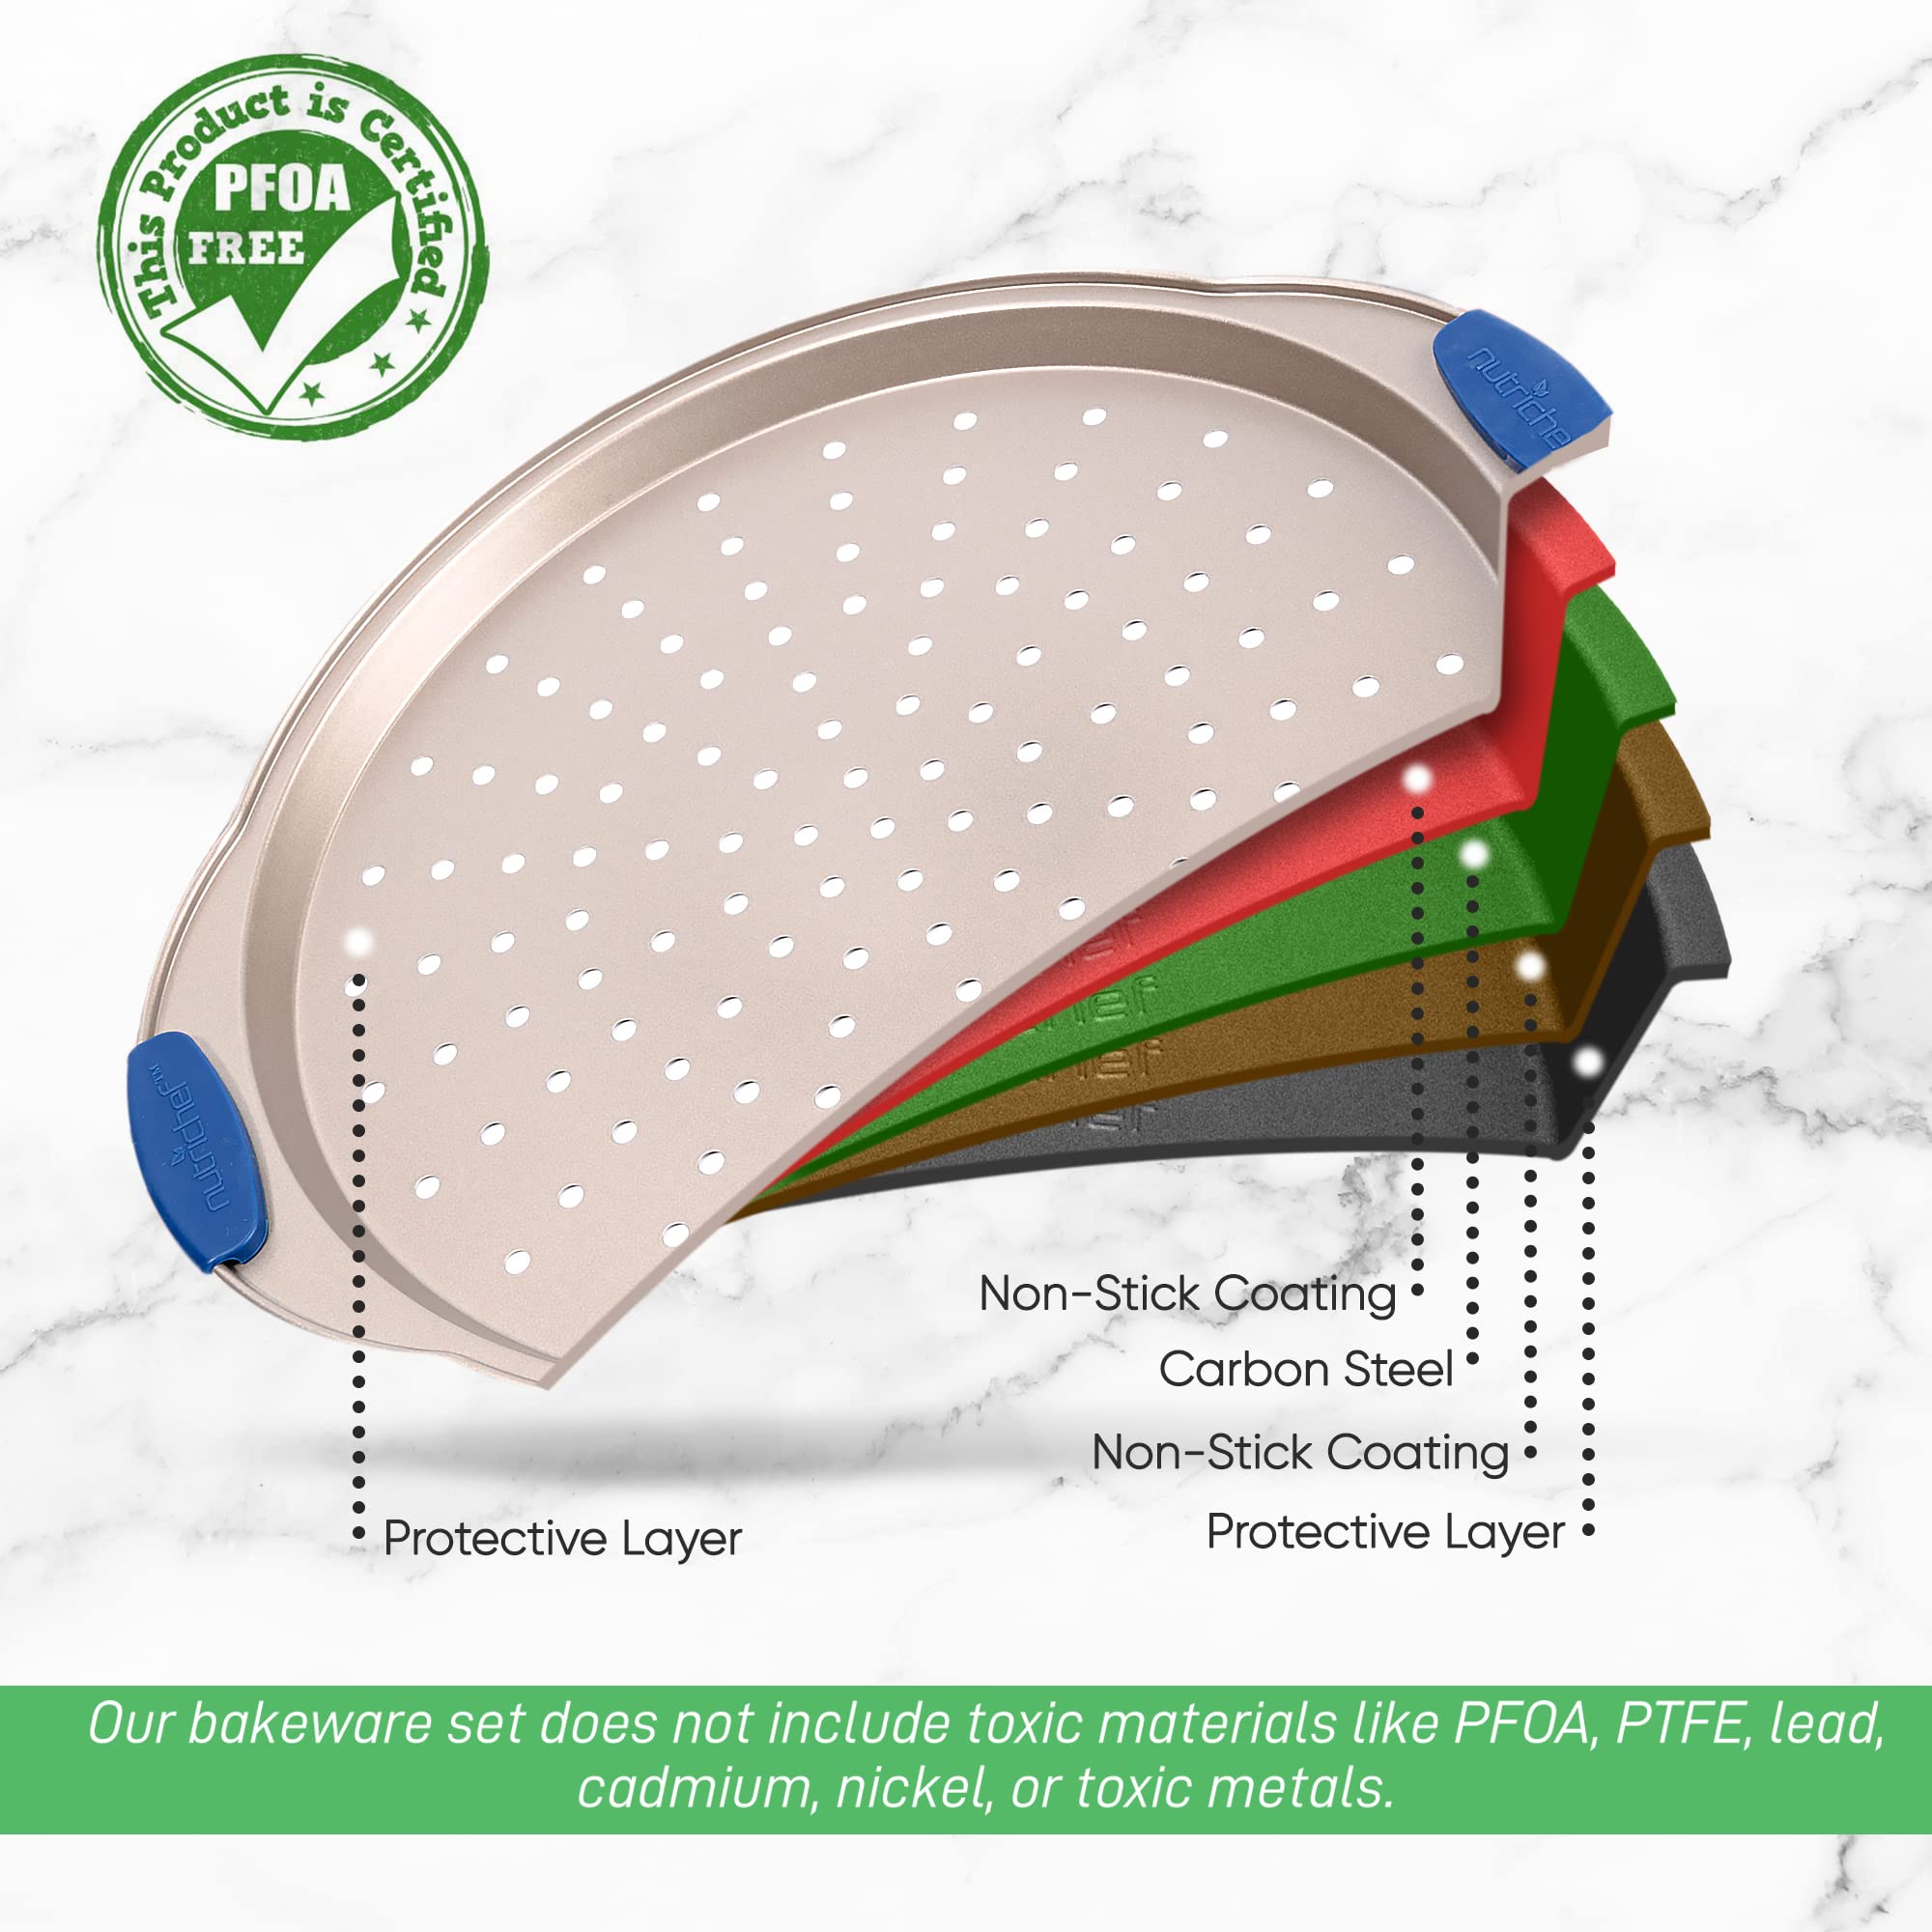 NutriChef Non-Stick Pizza Tray - with Silicone Handle, Round Steel Non-stick Pan with Perforated Holes, Premium Bakeware, Pizza Tray with Silicone and Oversized Handle, Dishwasher Safe - NCBPIZ2